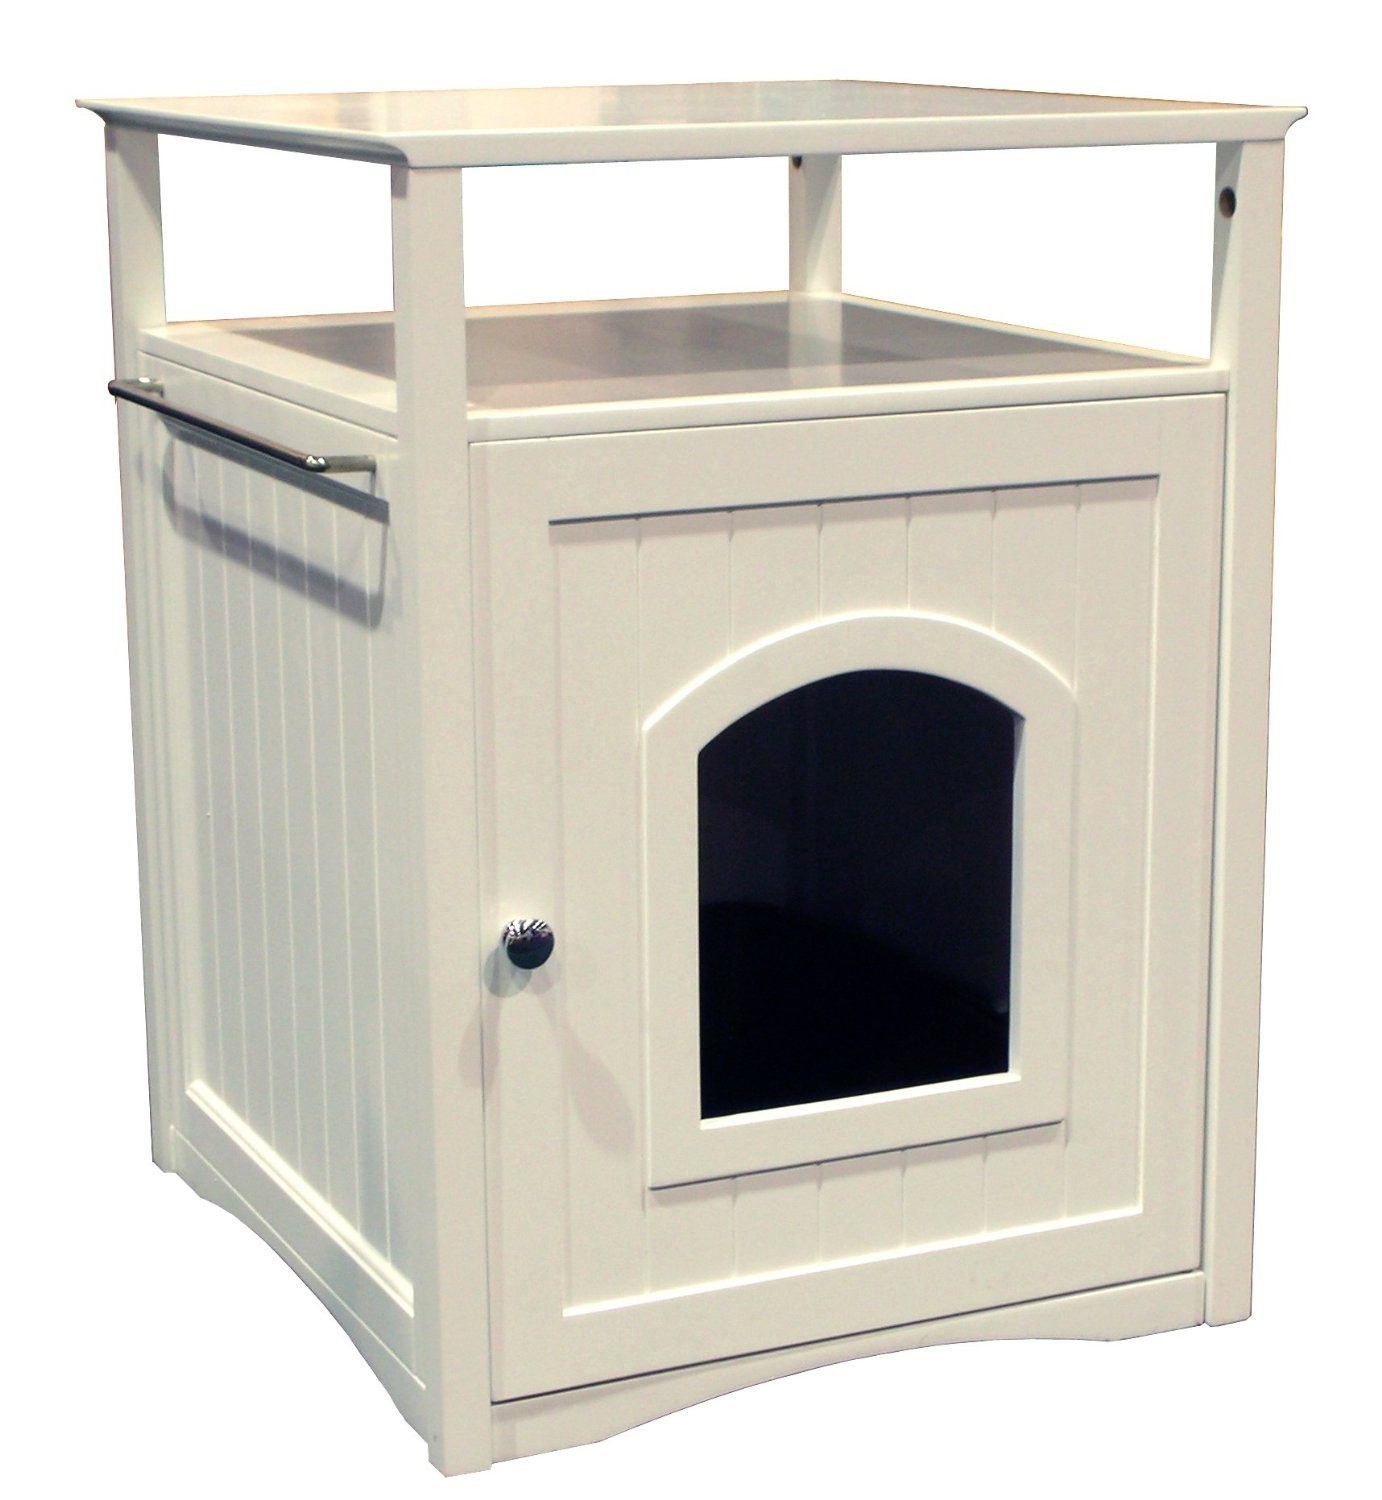 Merry products pet house and litter box furniture crazy